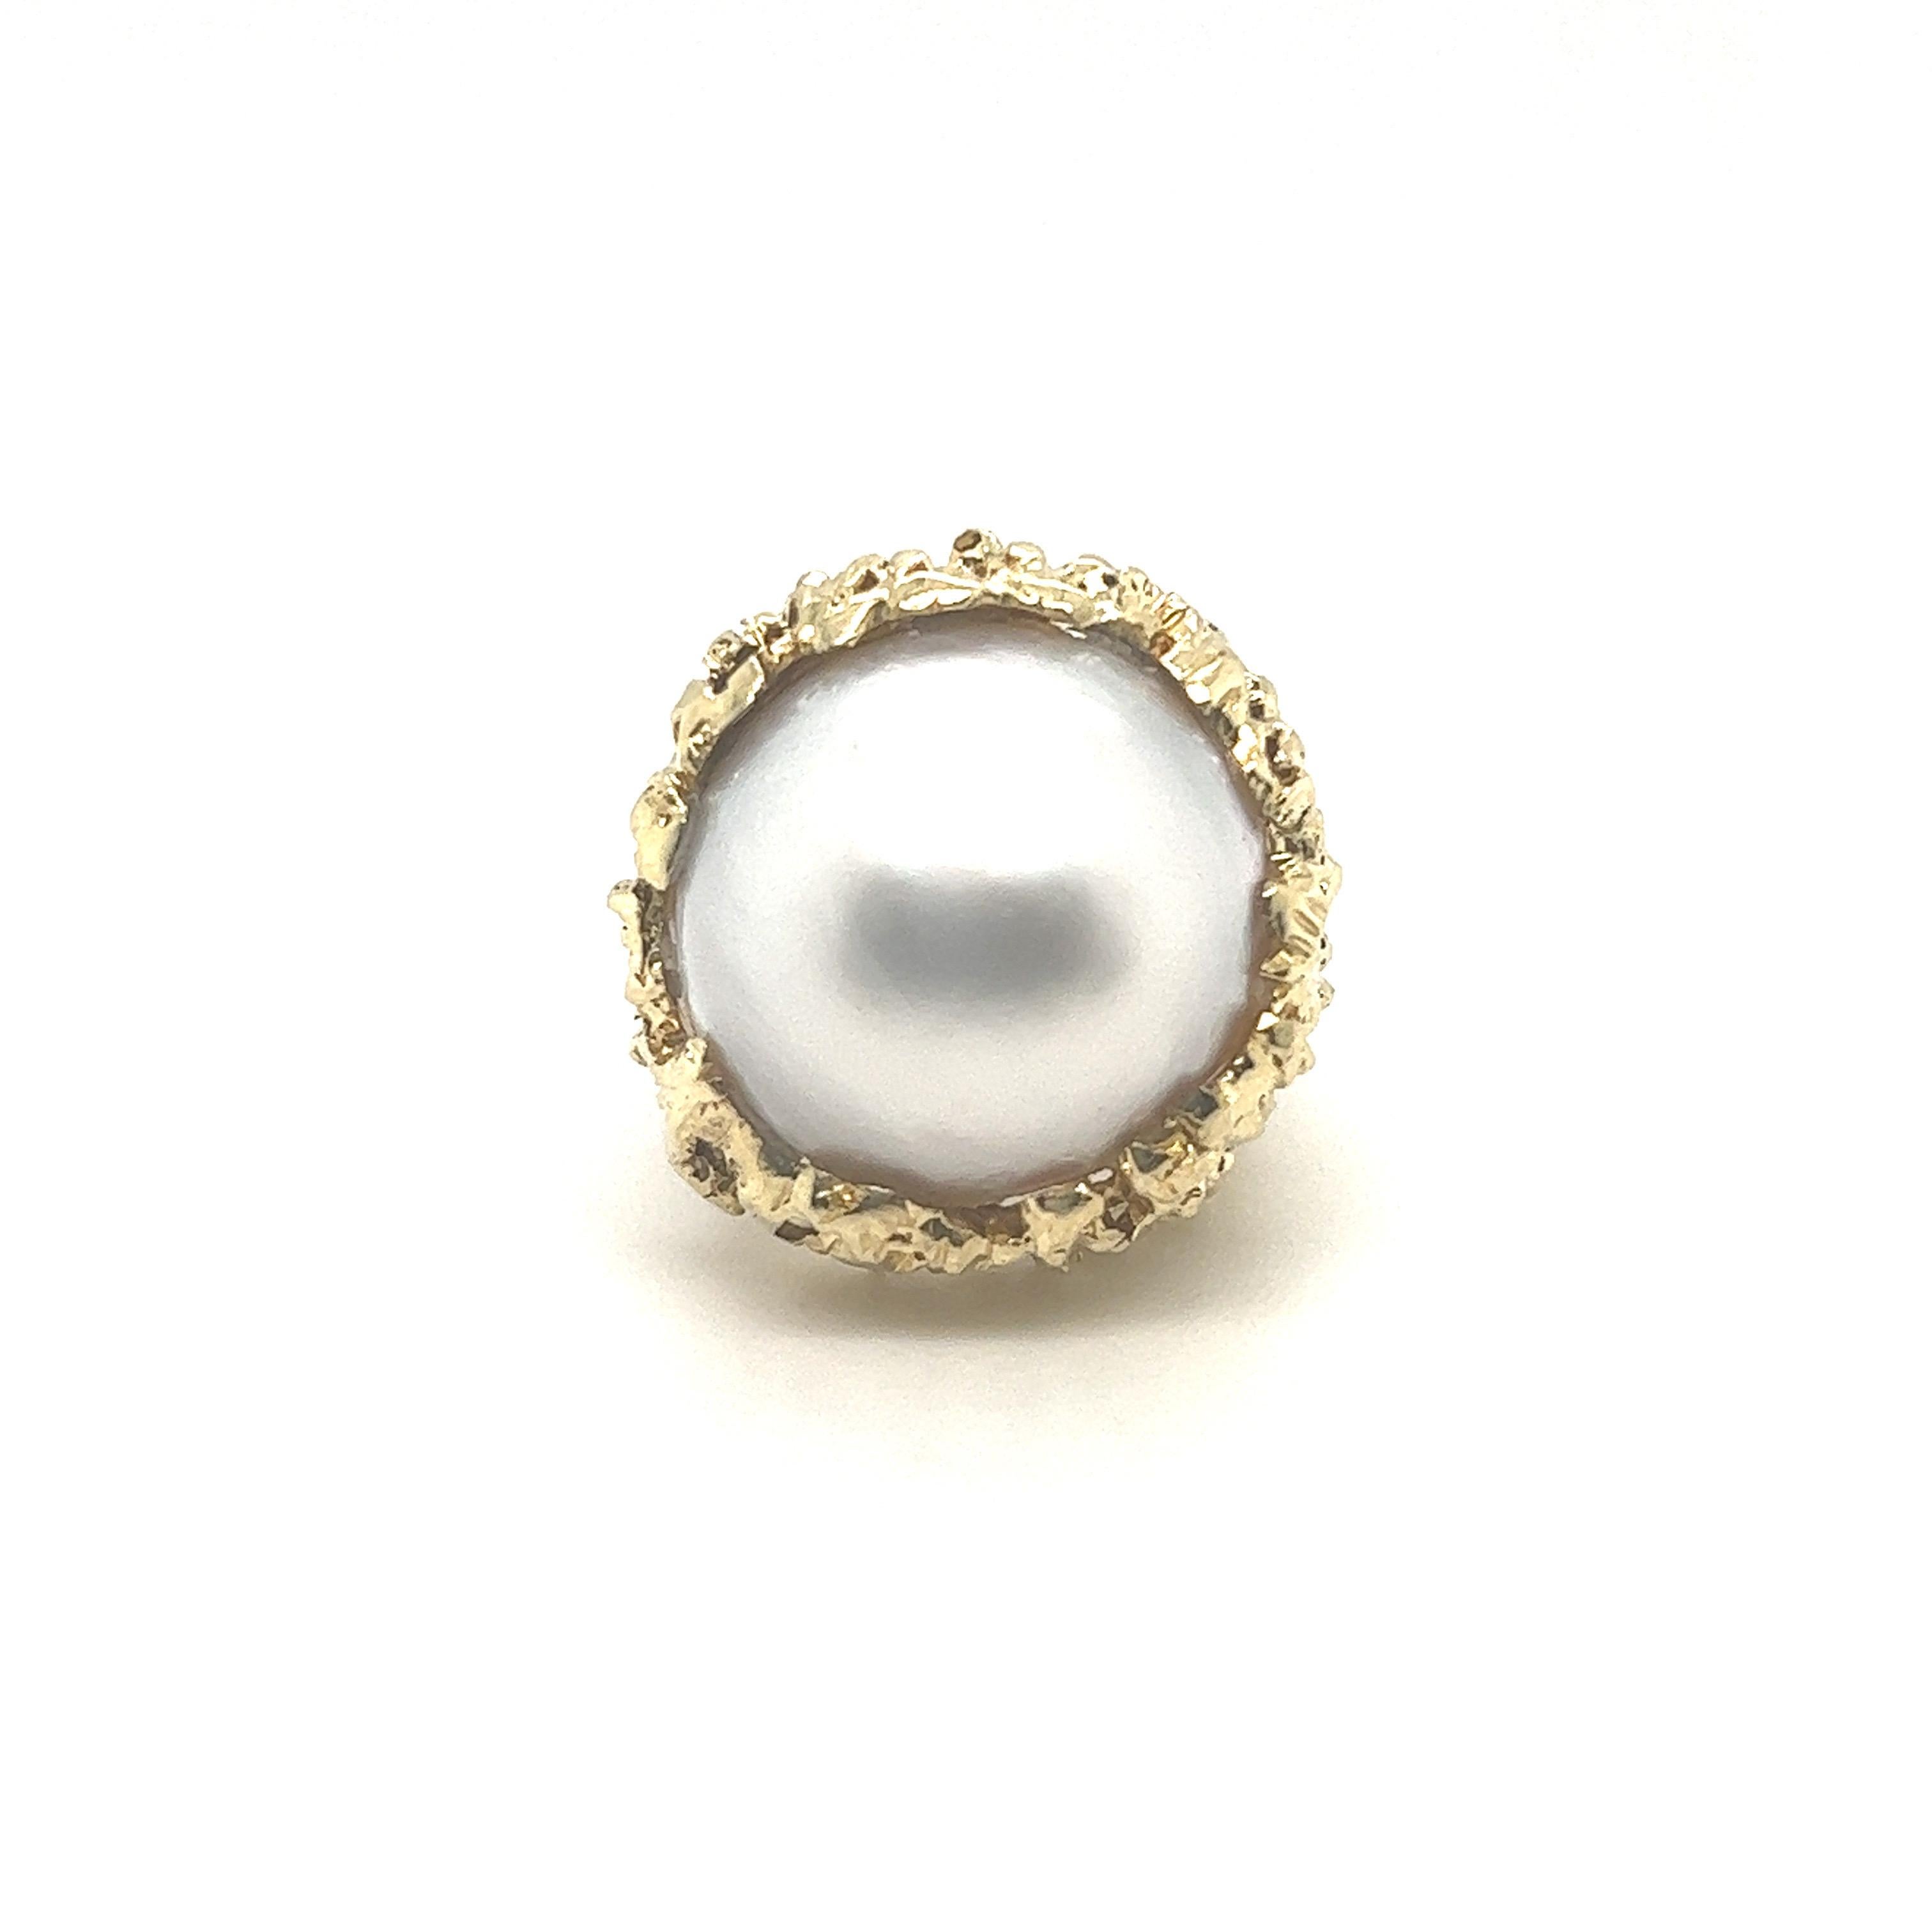 Glamorous and ladylike 14 karat yellow gold and mabe pearl cocktail ring from the 1970s. 
Crafted in 14 karat yellow gold, this eye-catching ring is set with a shiny mabe pearl of circa 1.8 cm / 0.7 inch diameter. The structured appearance of the